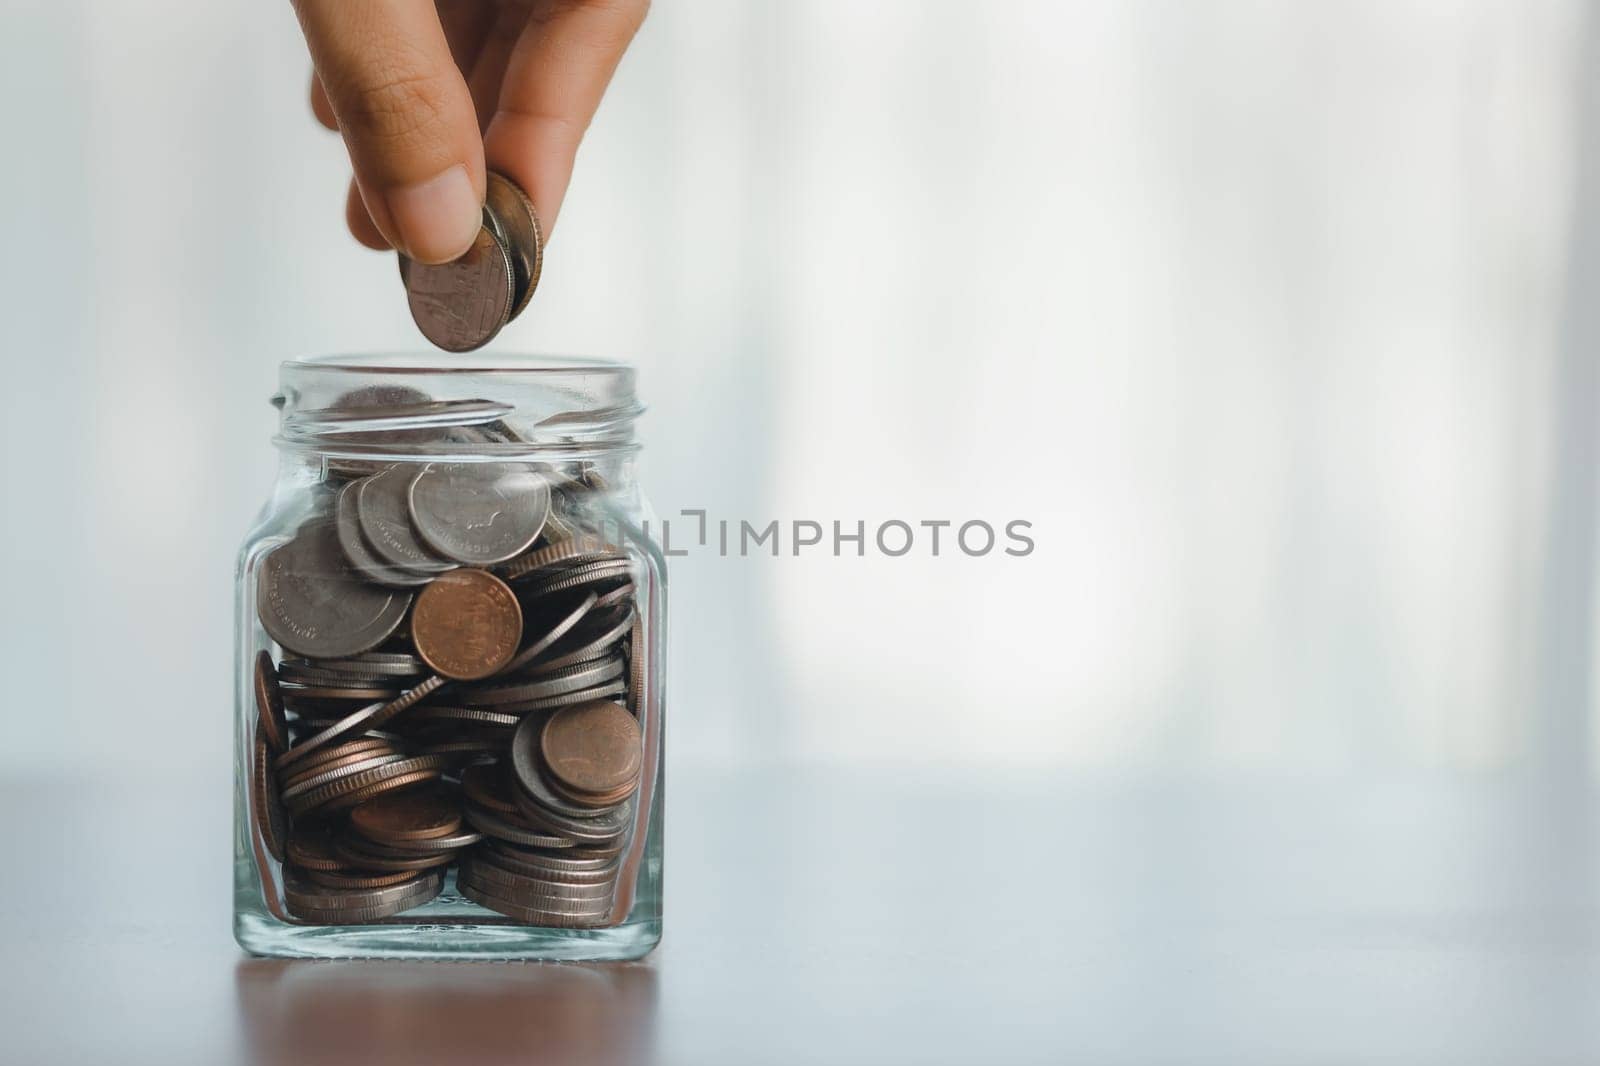 Glass jar with coins, a hand saving money, depicts a business concept of financial growth, combining elements of currency, container, and human touch